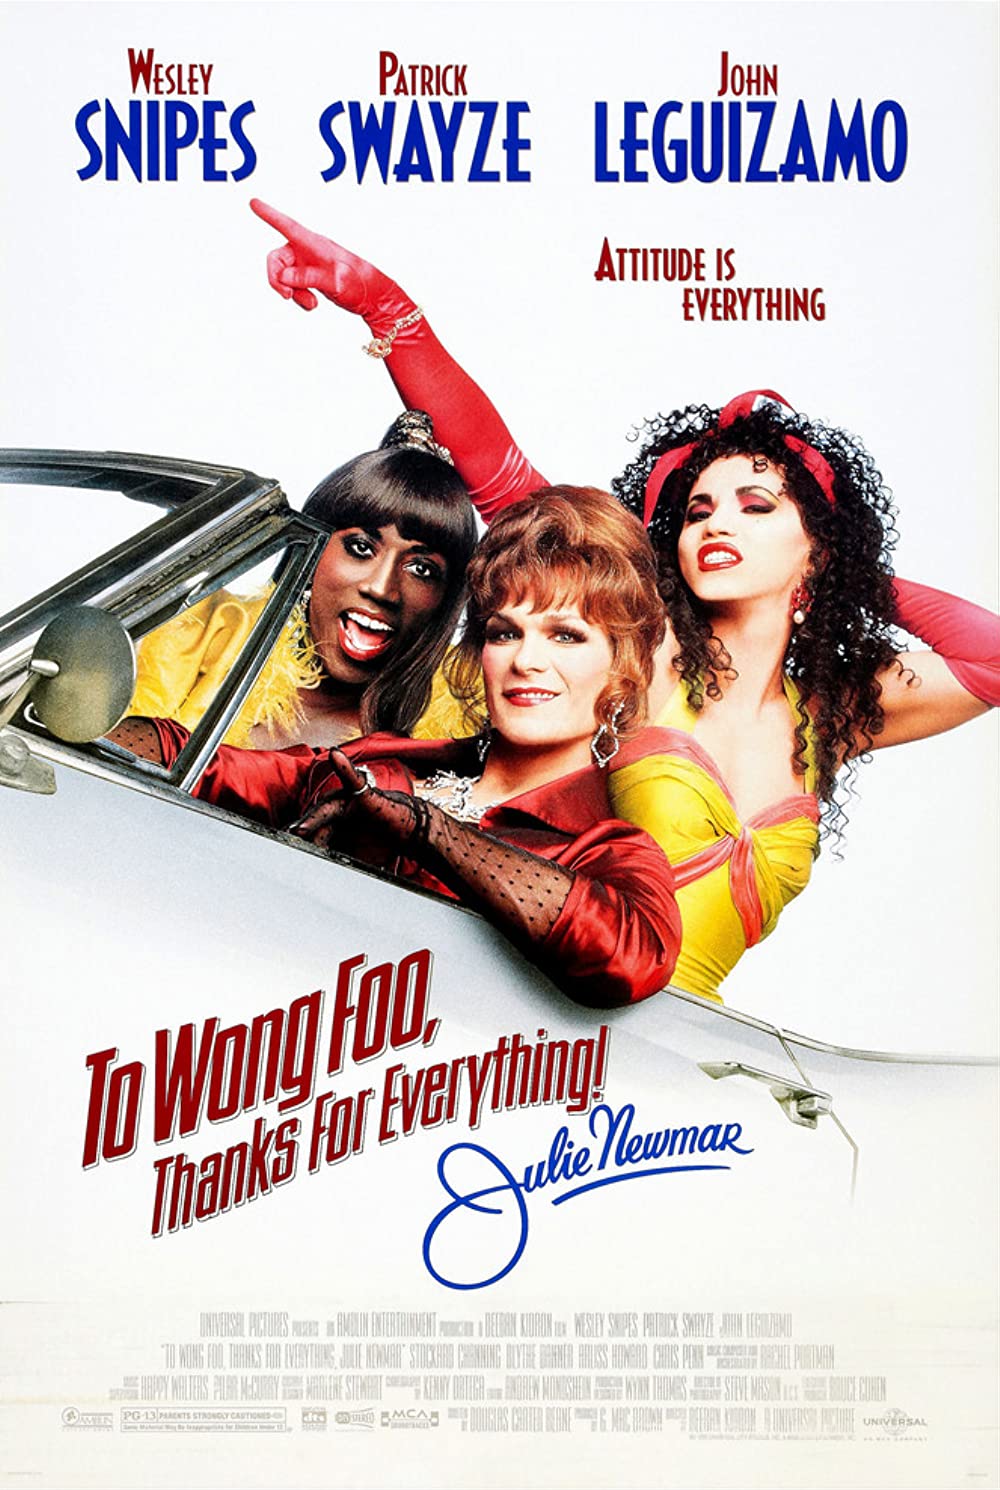 Image of the box cover of the film Too Wong Foo Thanks for Everything Julue Newmar